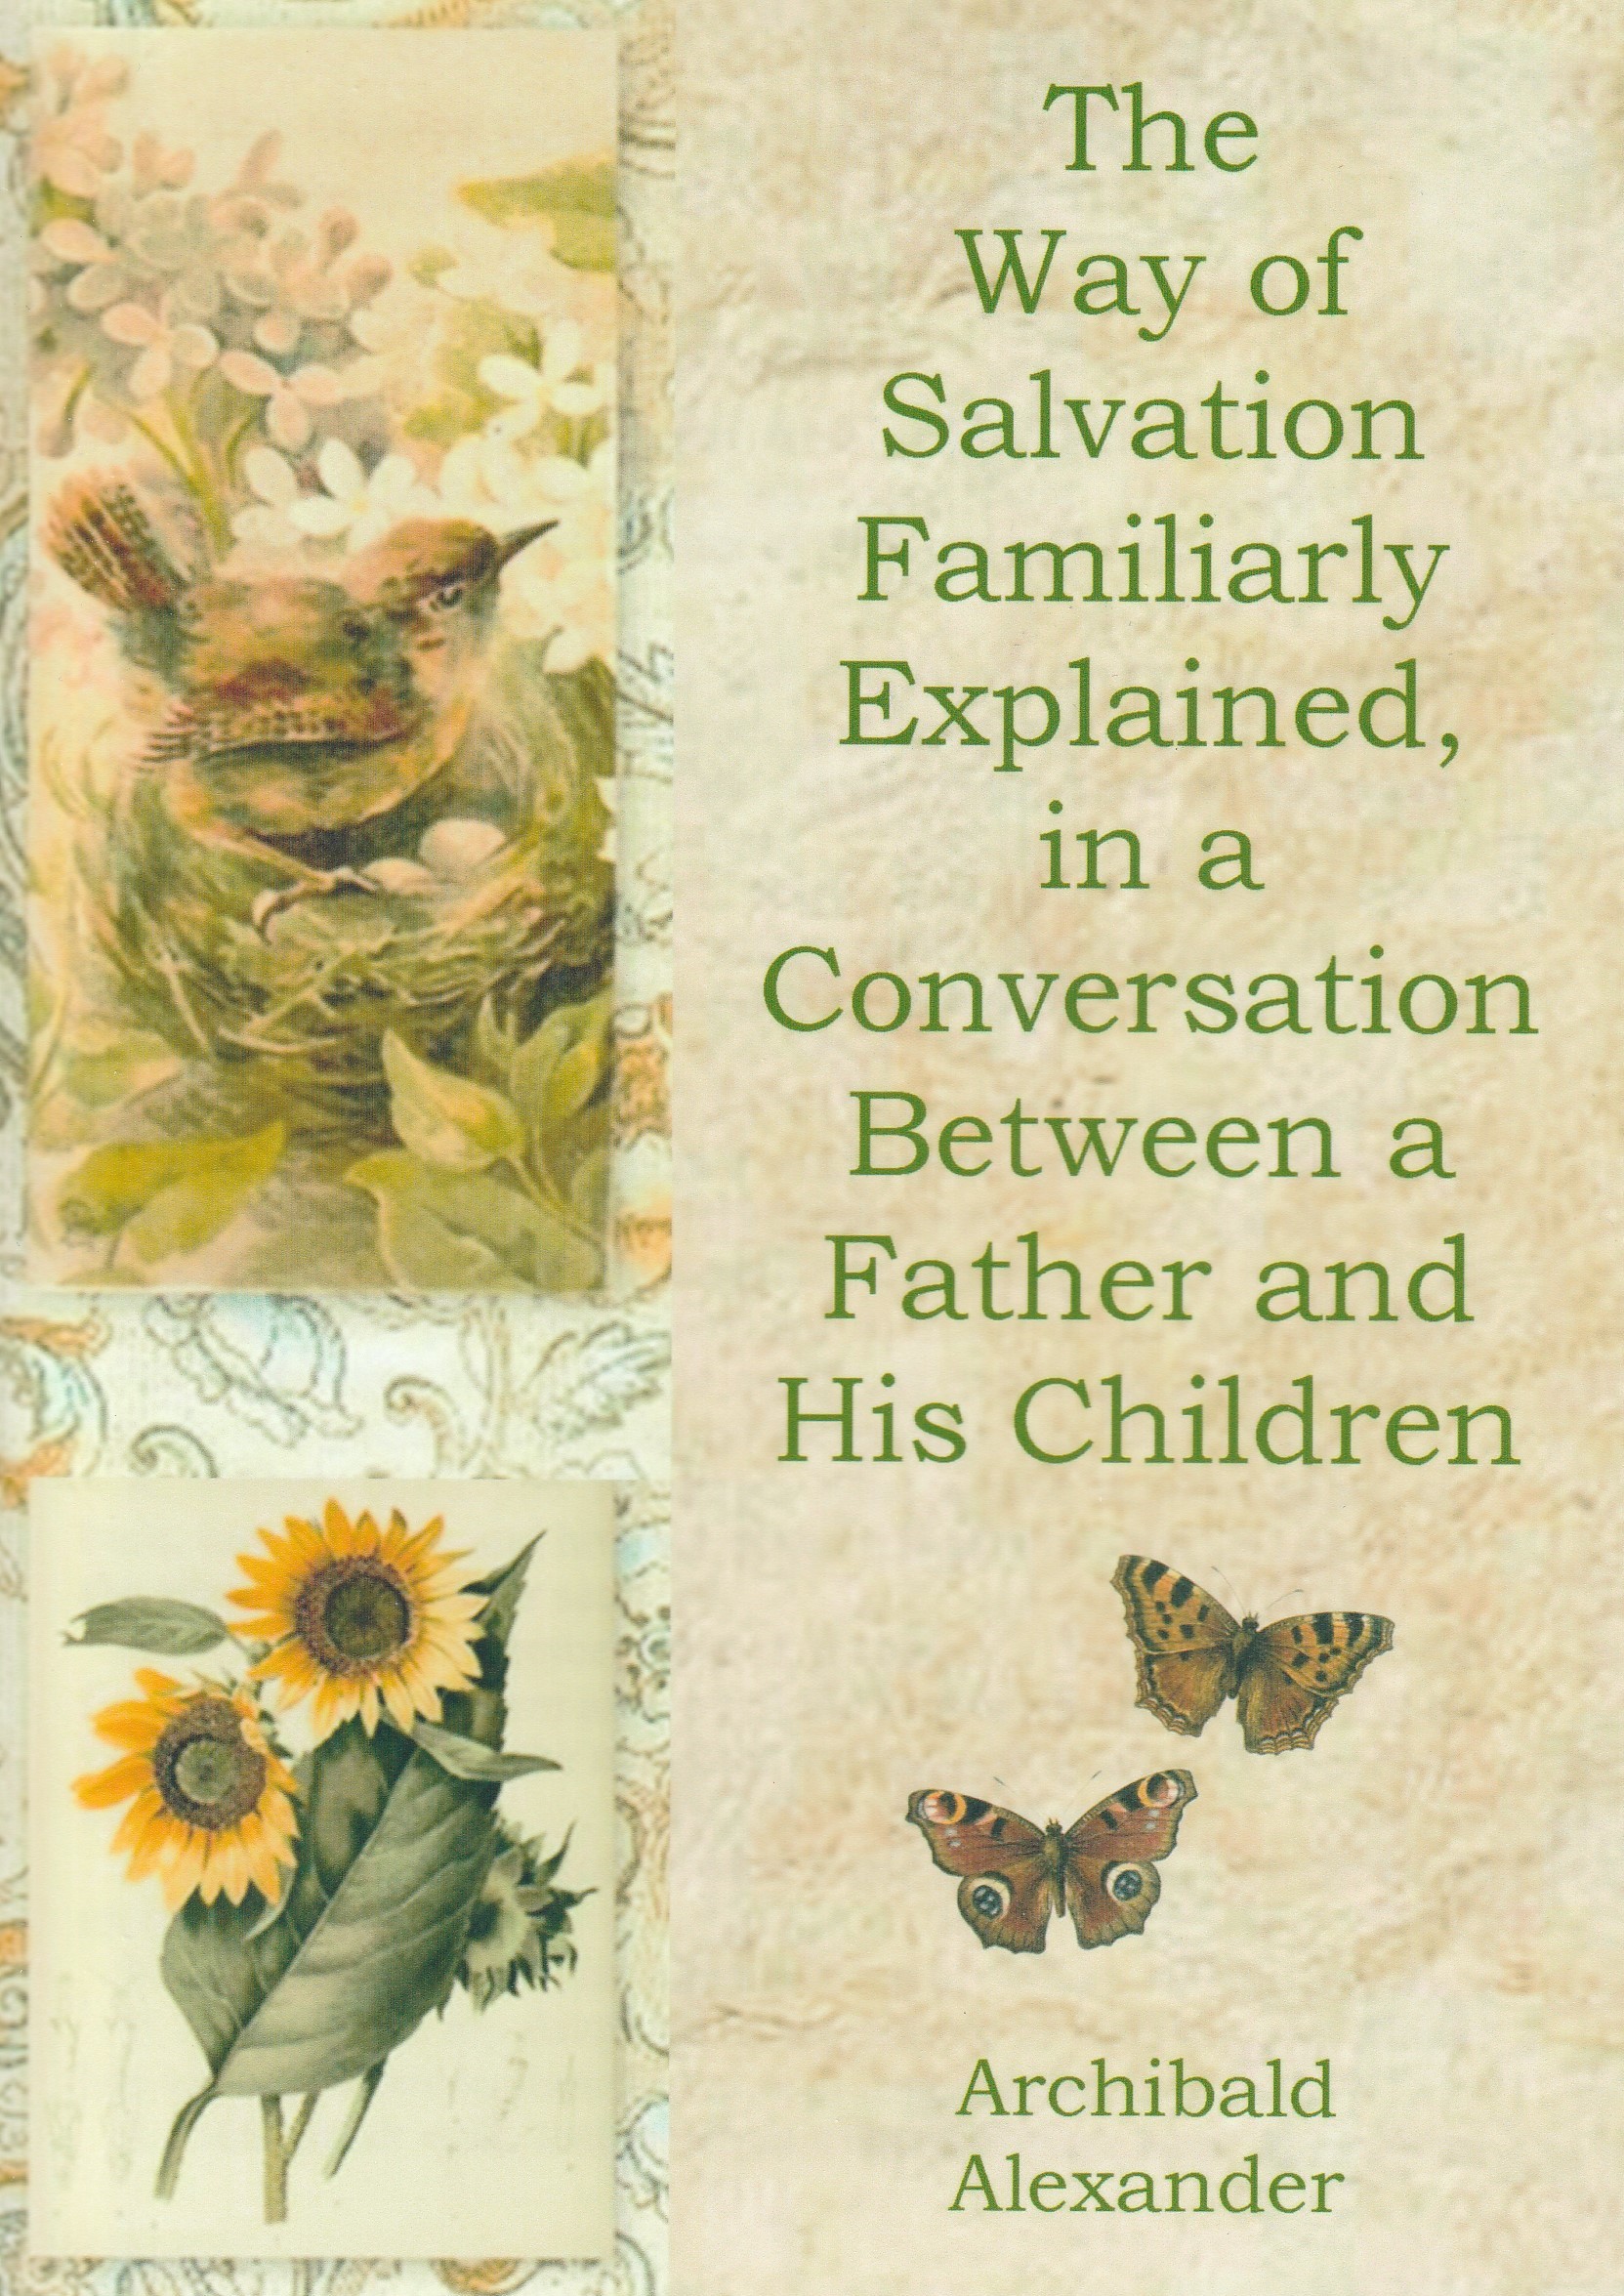 The Way of Salvation Familiarly Explained, in a Conversation Between a Father and His Children